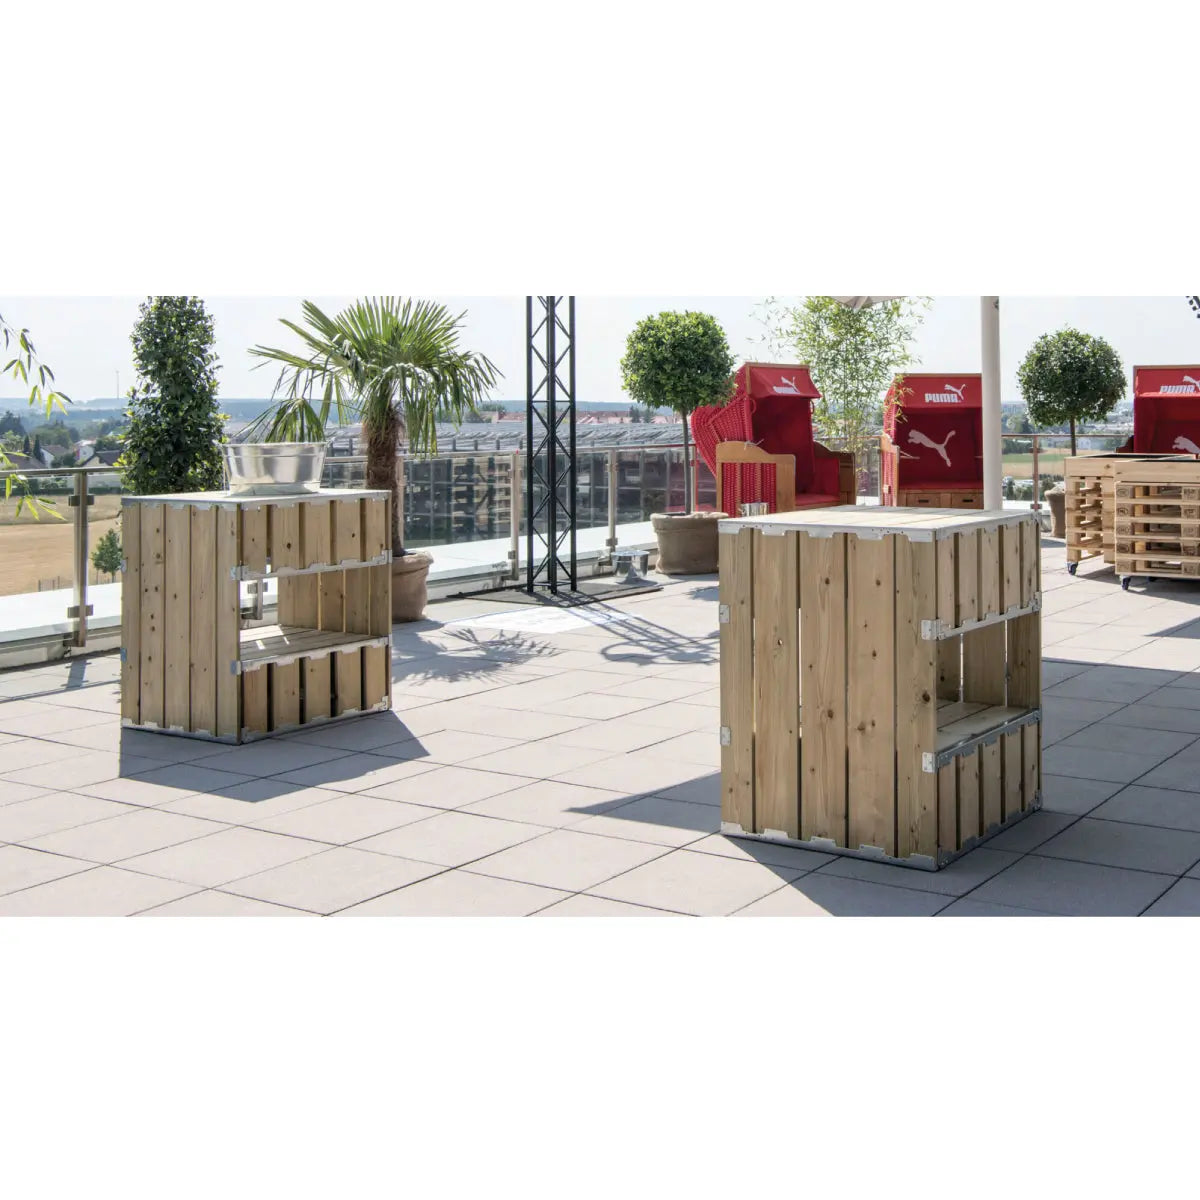 The crate high table cube Desert River Rentals